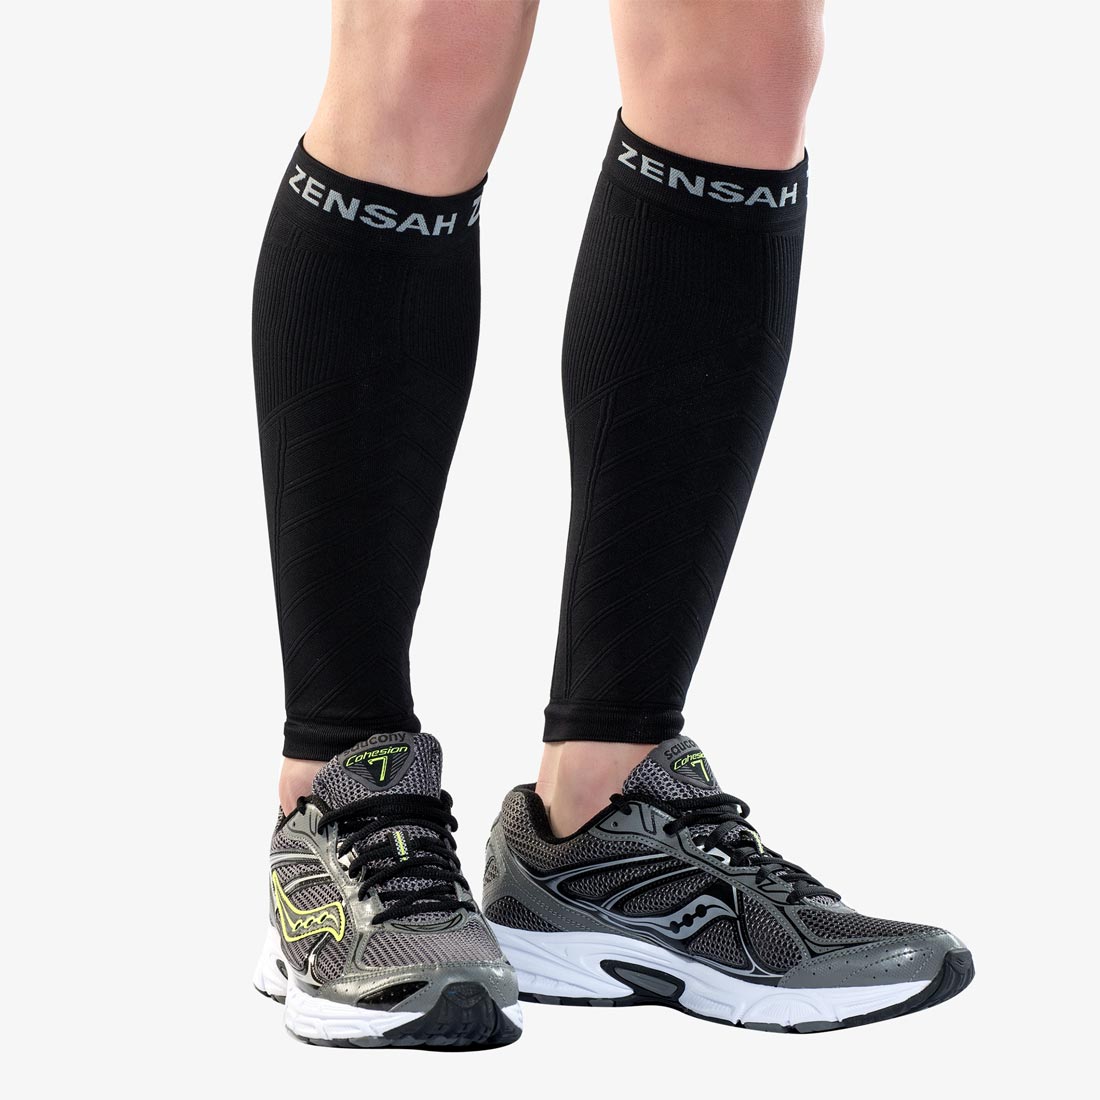 Zensah Compression Ankle / Calf Sleeves: #1 Fast Free Shipping